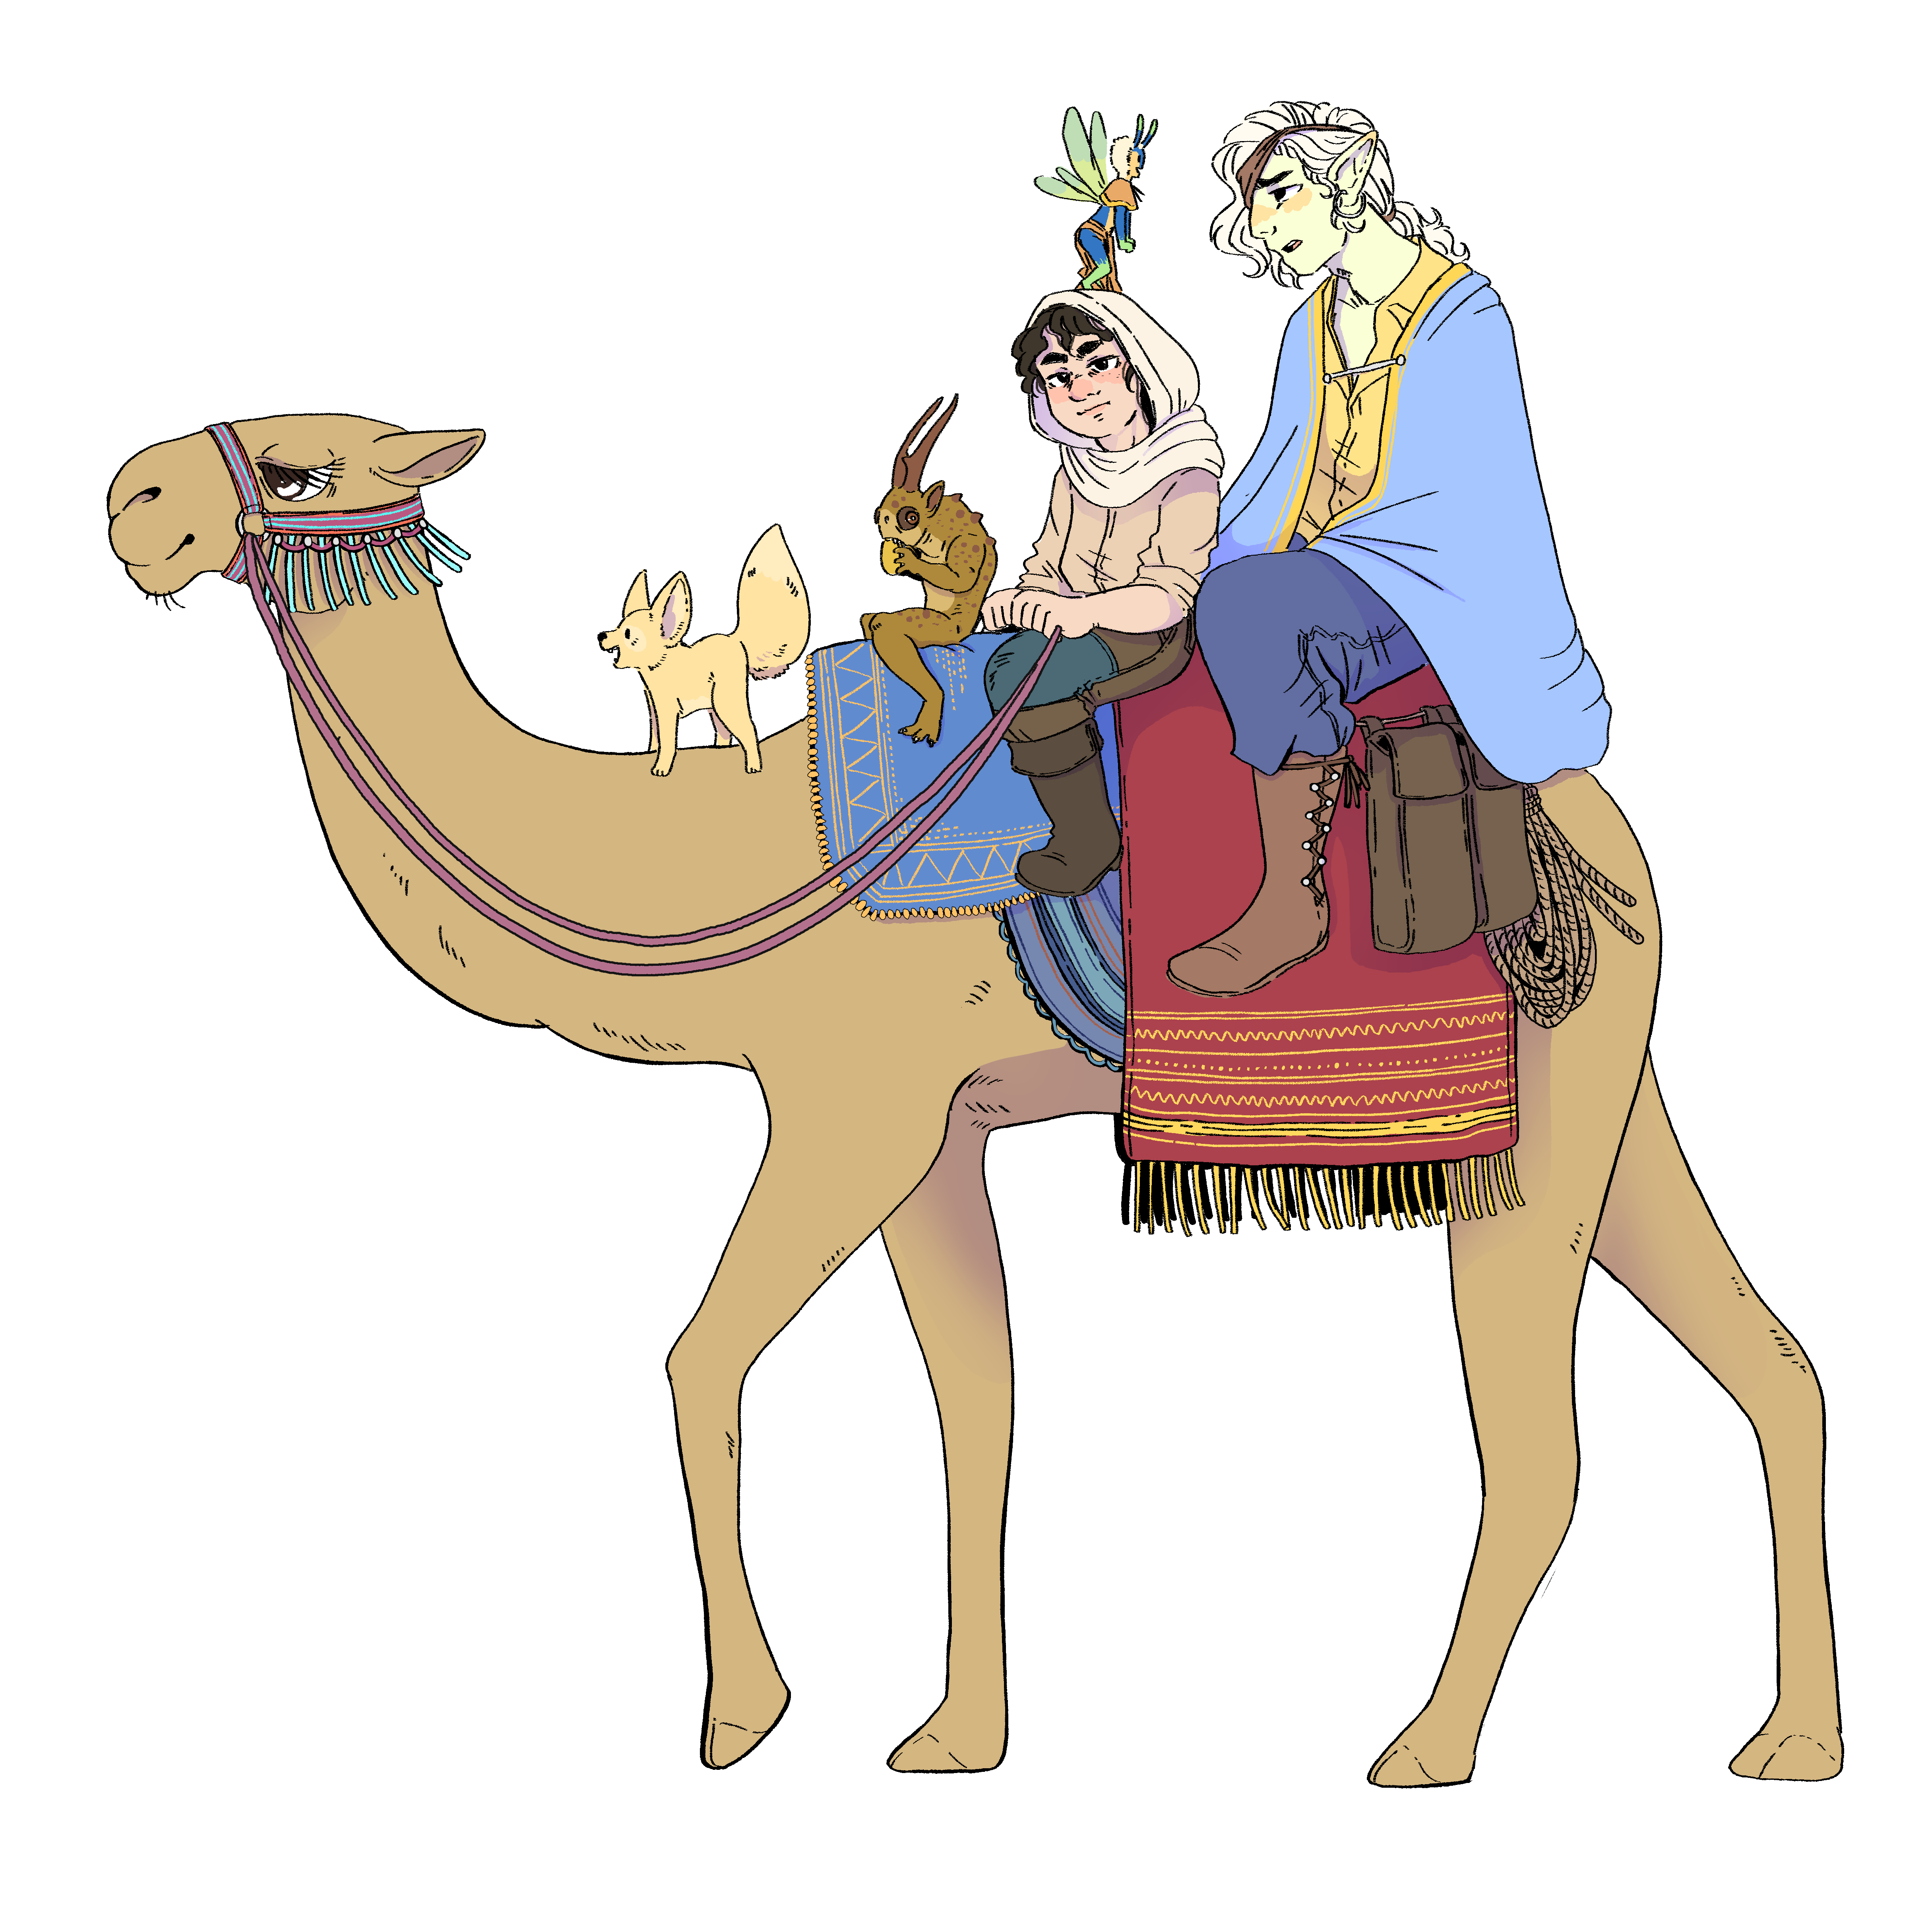 Halfling, elf, fae and some little creature on a camel